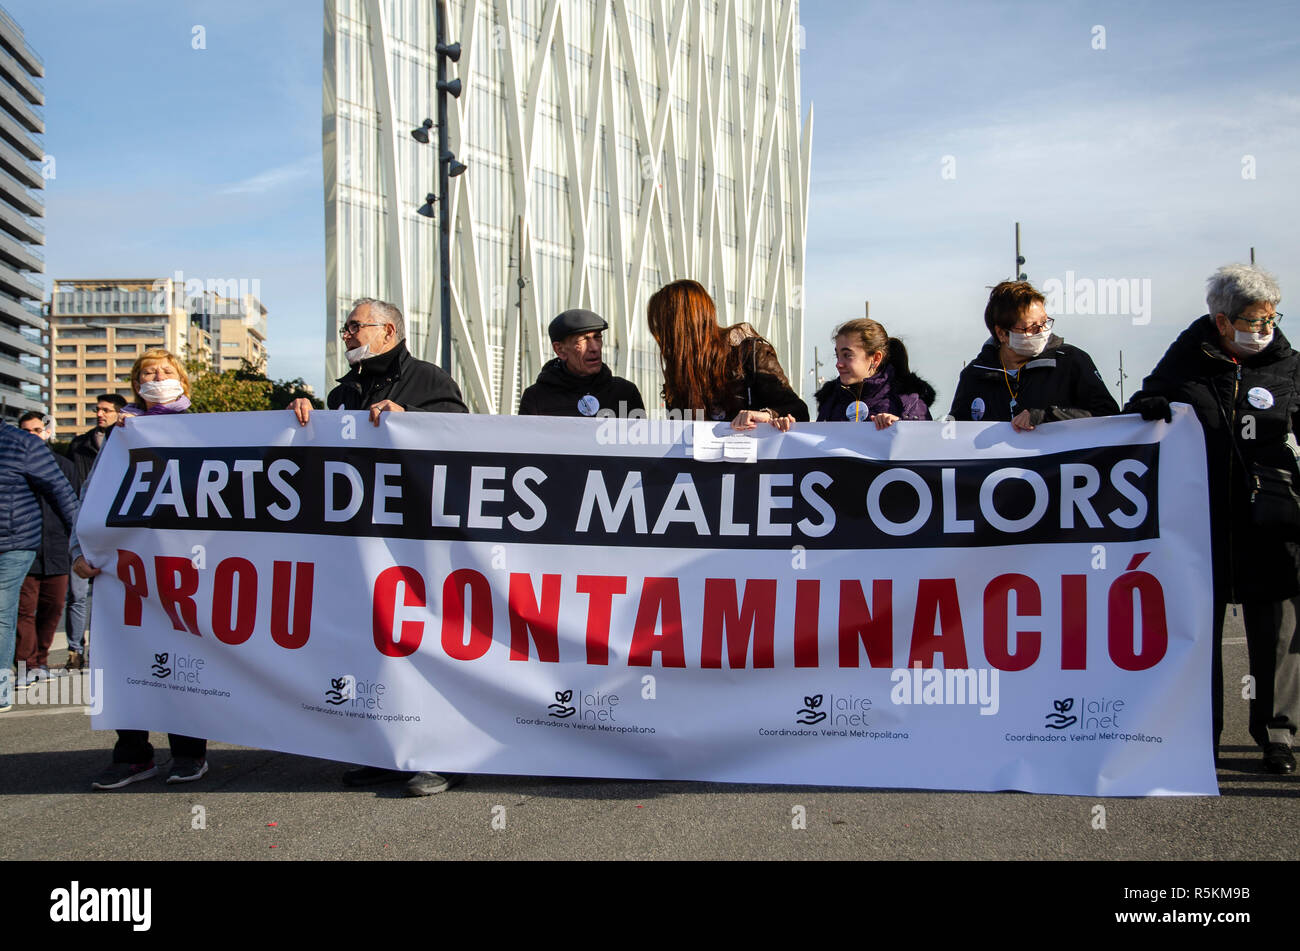 Demonstrators are seen behind a banner calling for an end to the contamination of the Forum area during the protest. Some 300 residents affected by the bad smells and air pollution of the Tersa public incineration plant manifested  demanding that the City Council of Barcelona definitively closes the incinerator plant. Tersa incinerates garbage and generates electricity. Stock Photo